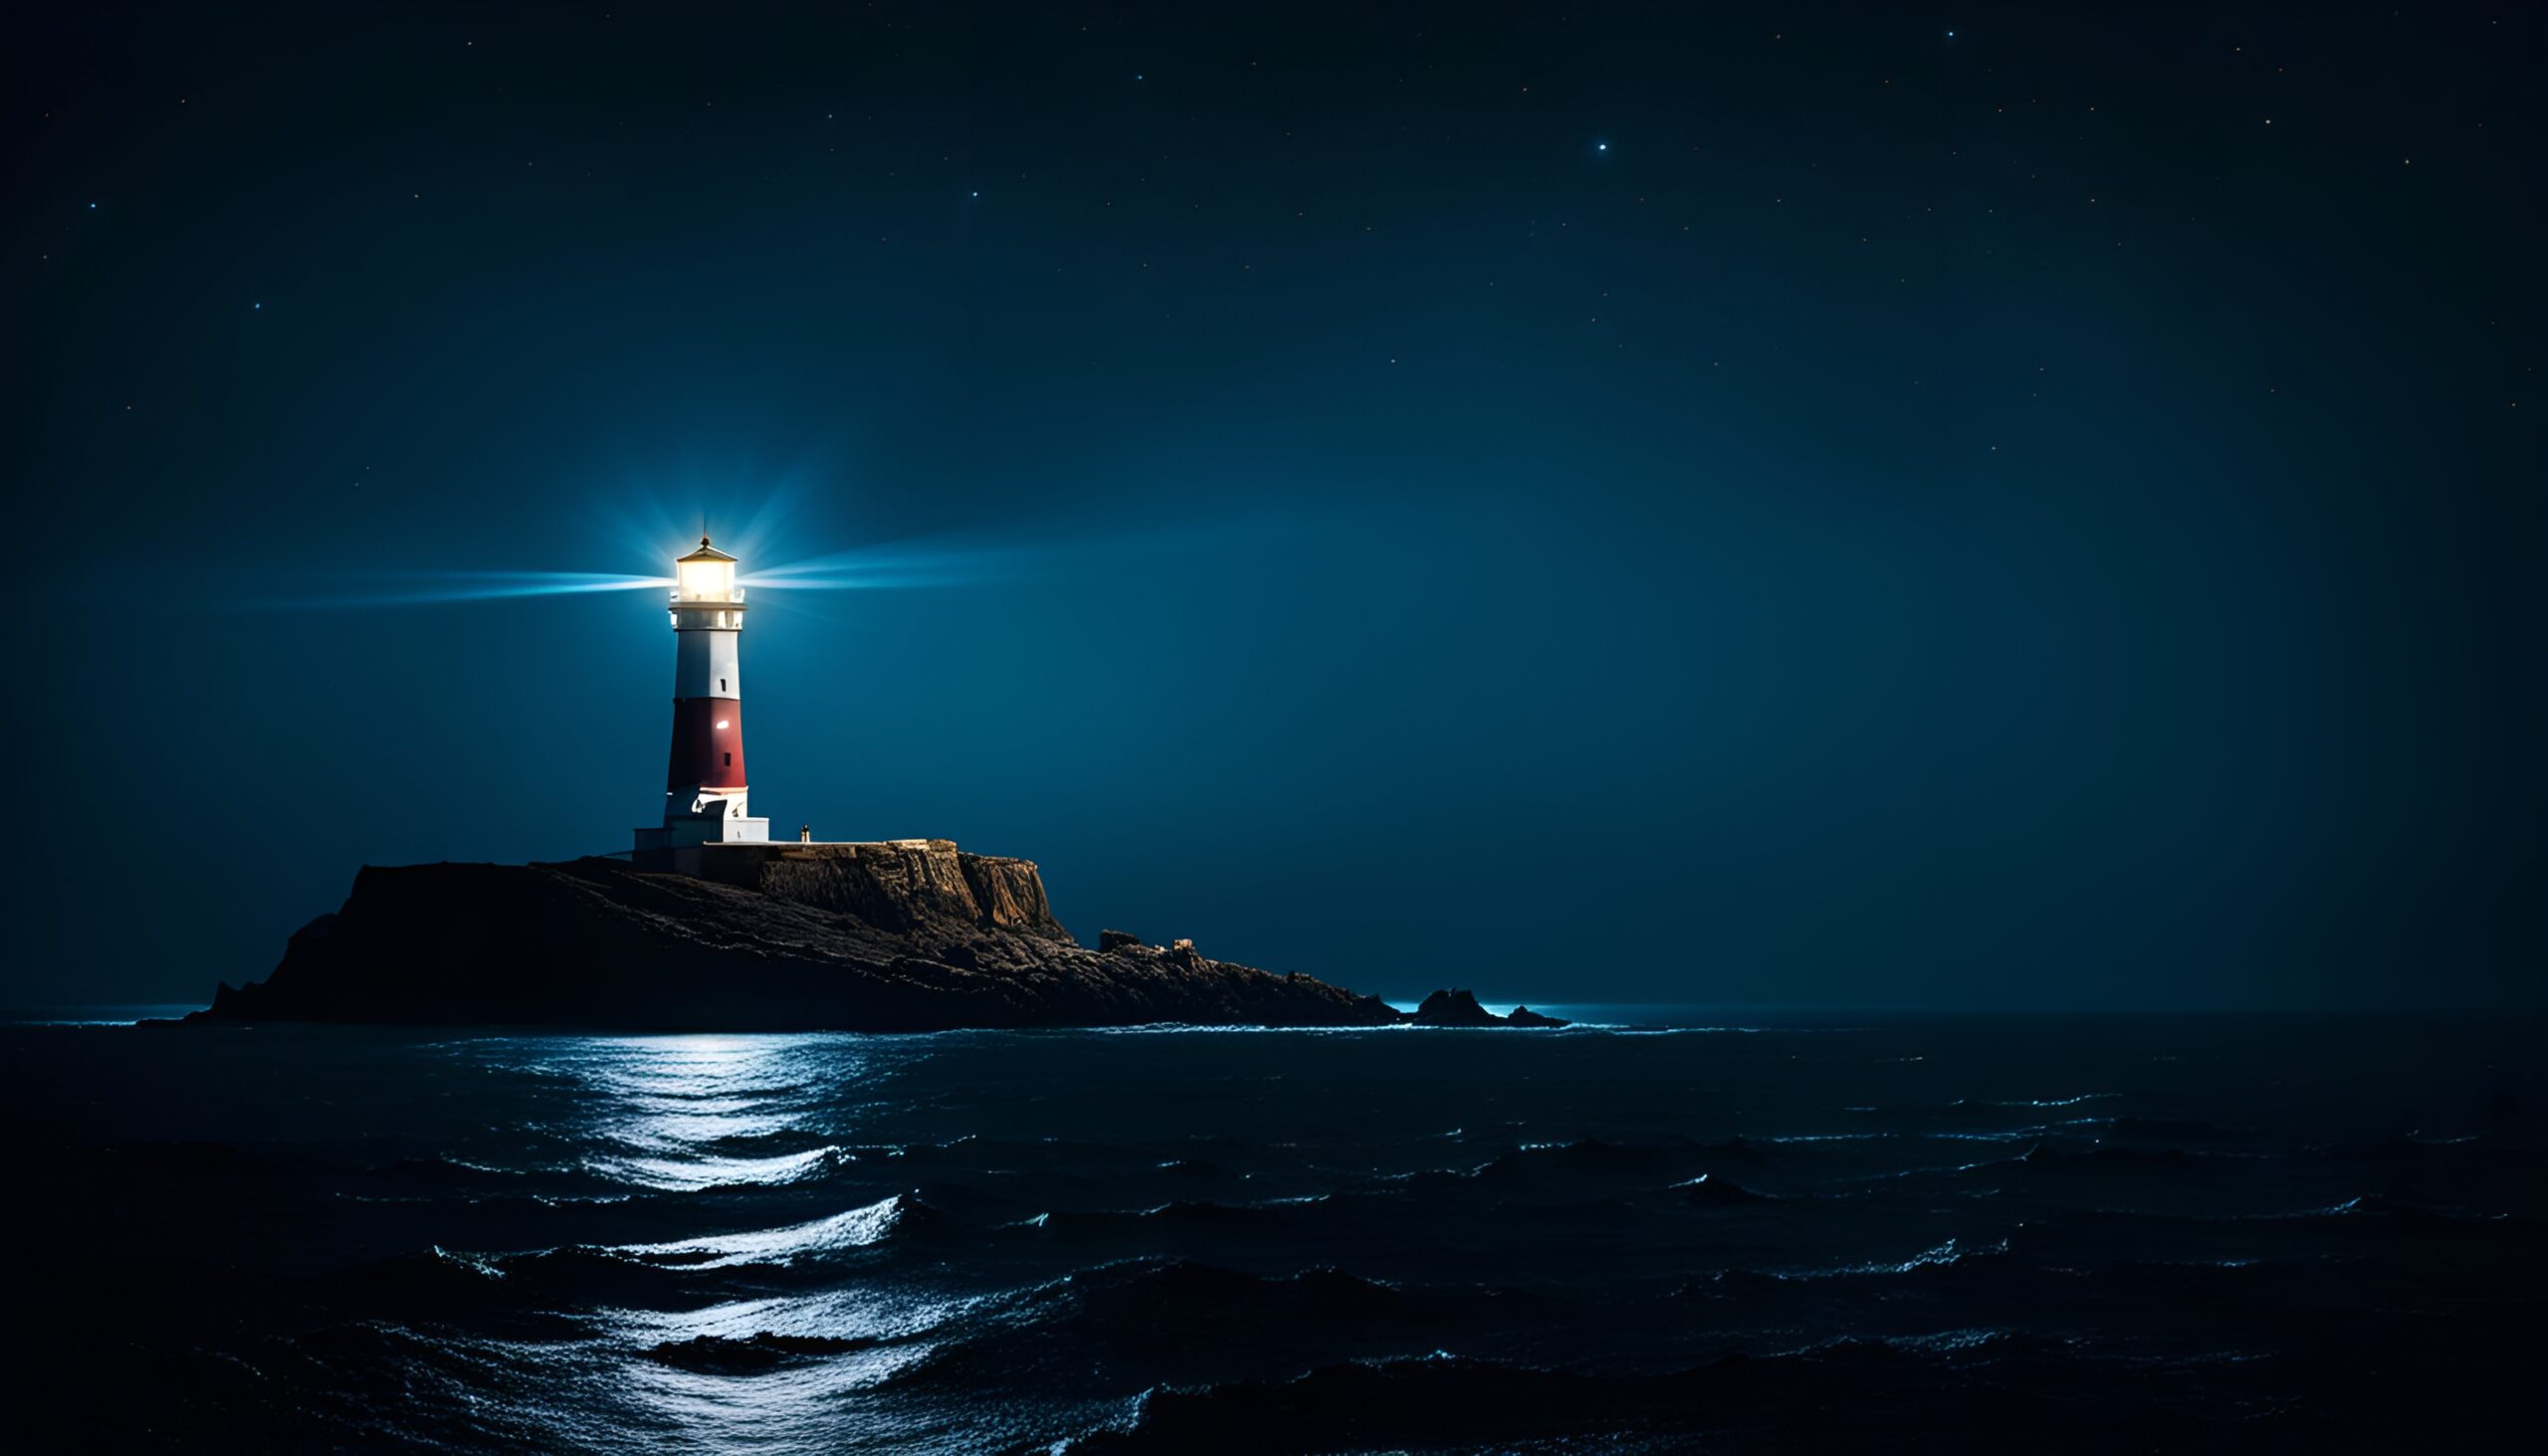 My lighthouse at the end of the world. Image generated by NightCafe